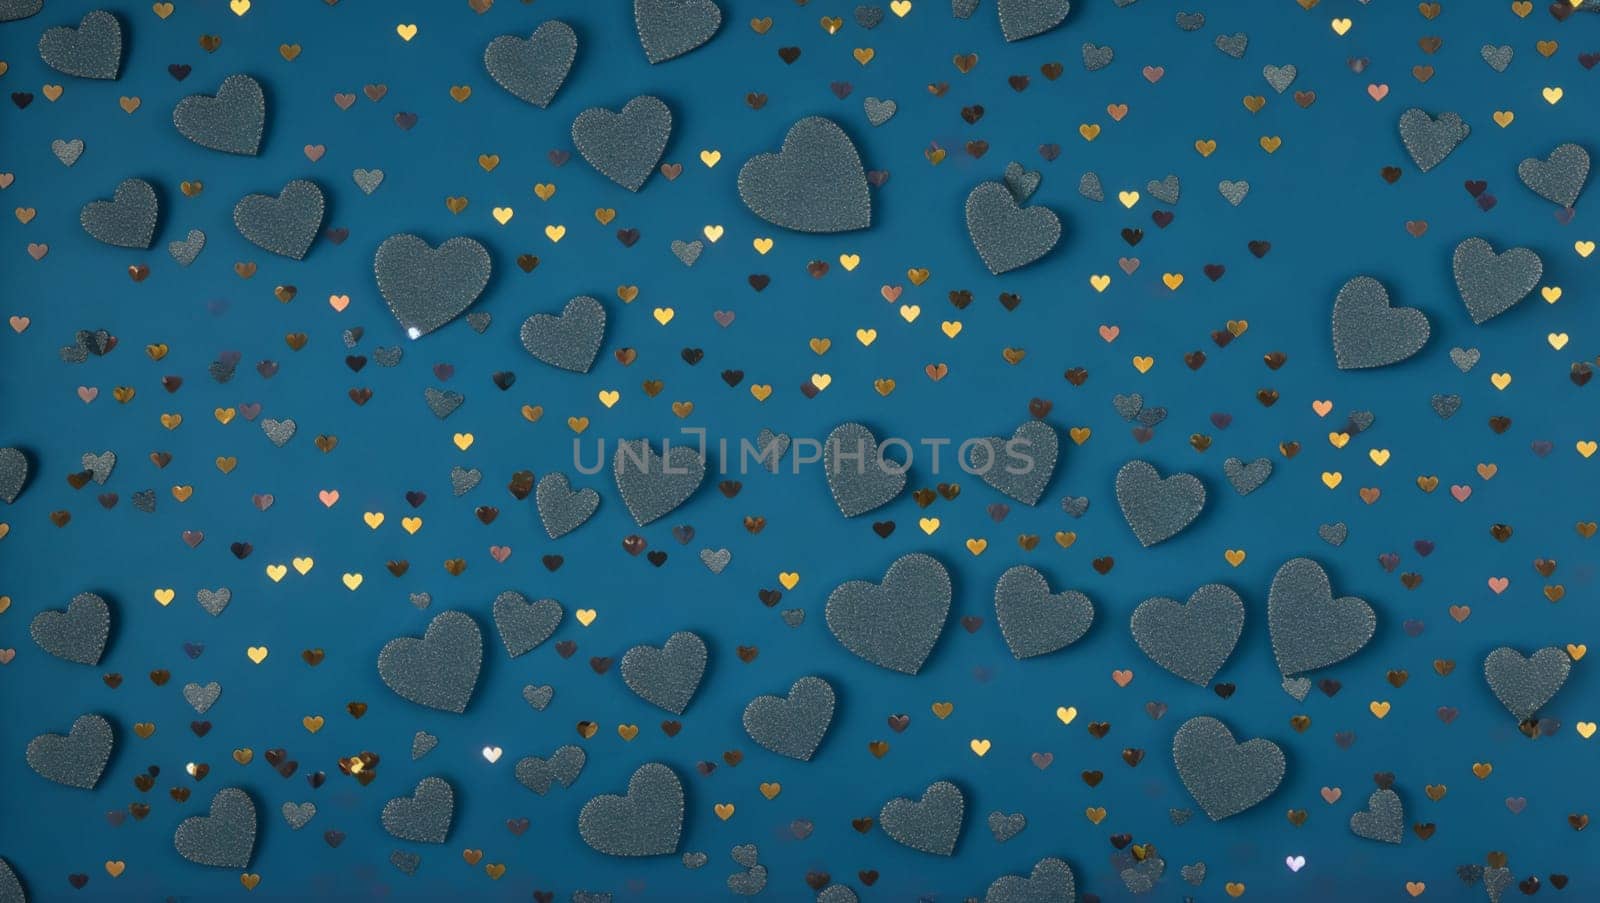 Nice background with cheerful green textured hearts, small golden shiny hearts with blue background. by XabiDonostia